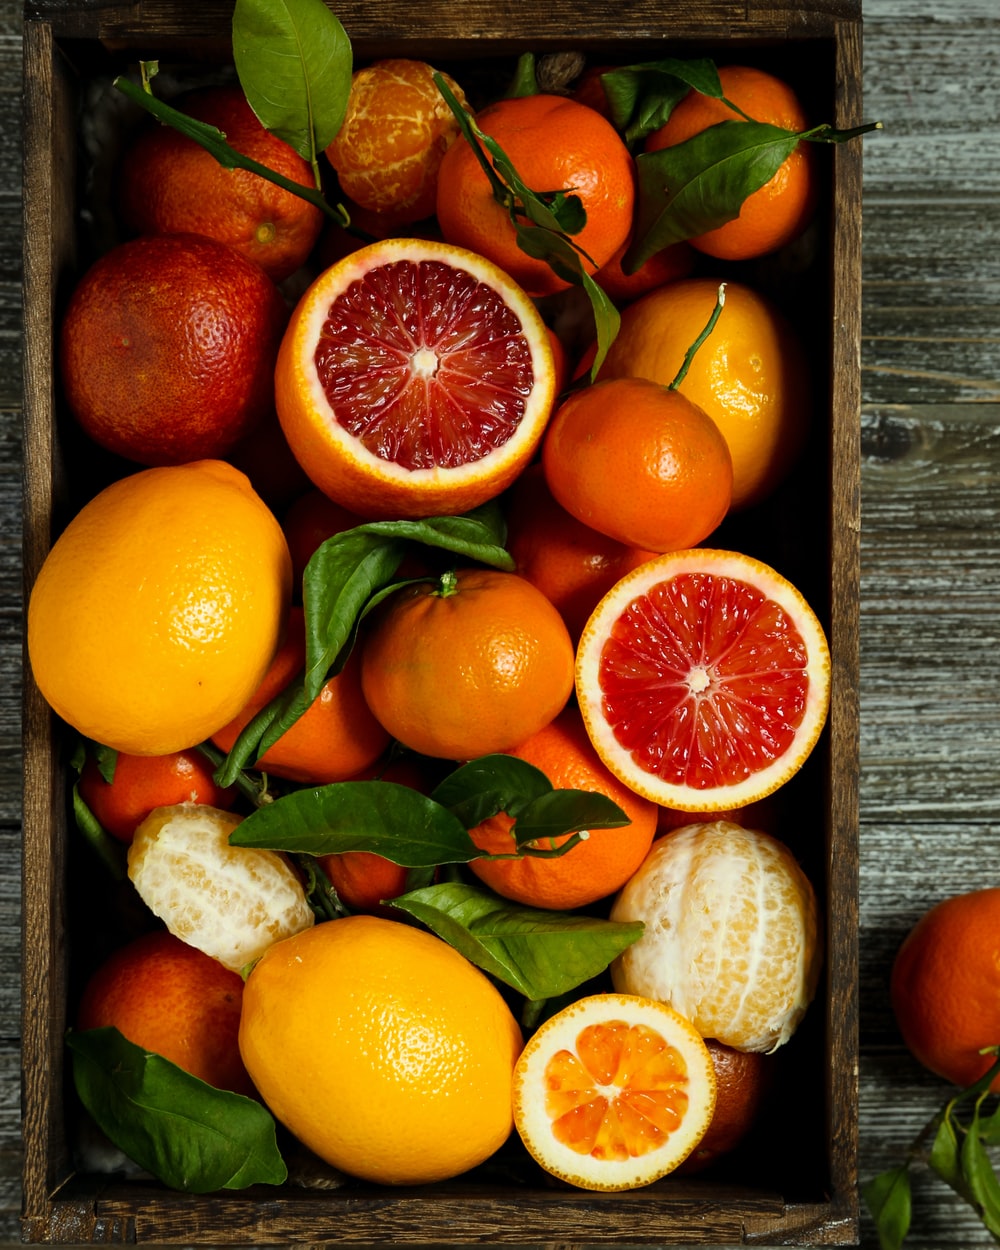 Citrus fruits placed on a wooden table